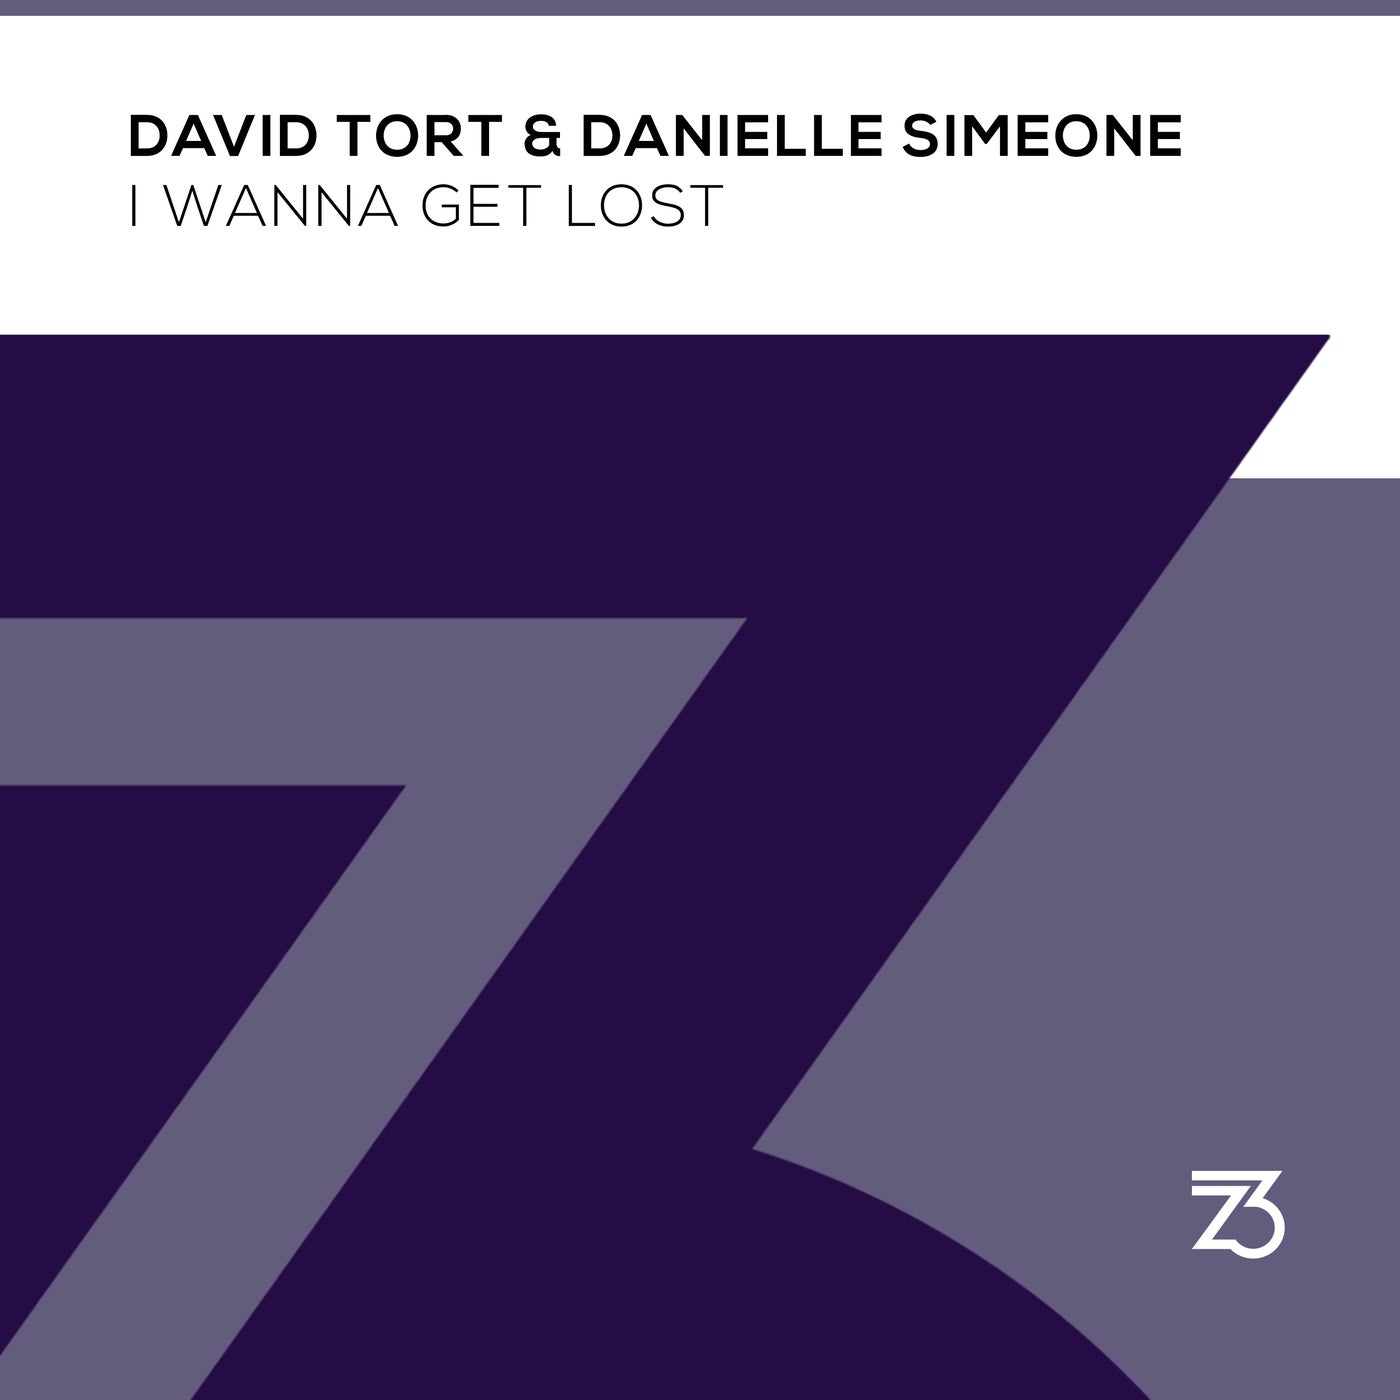 Download David Tort, Danielle Simeone - I Wanna Get Lost on Electrobuzz